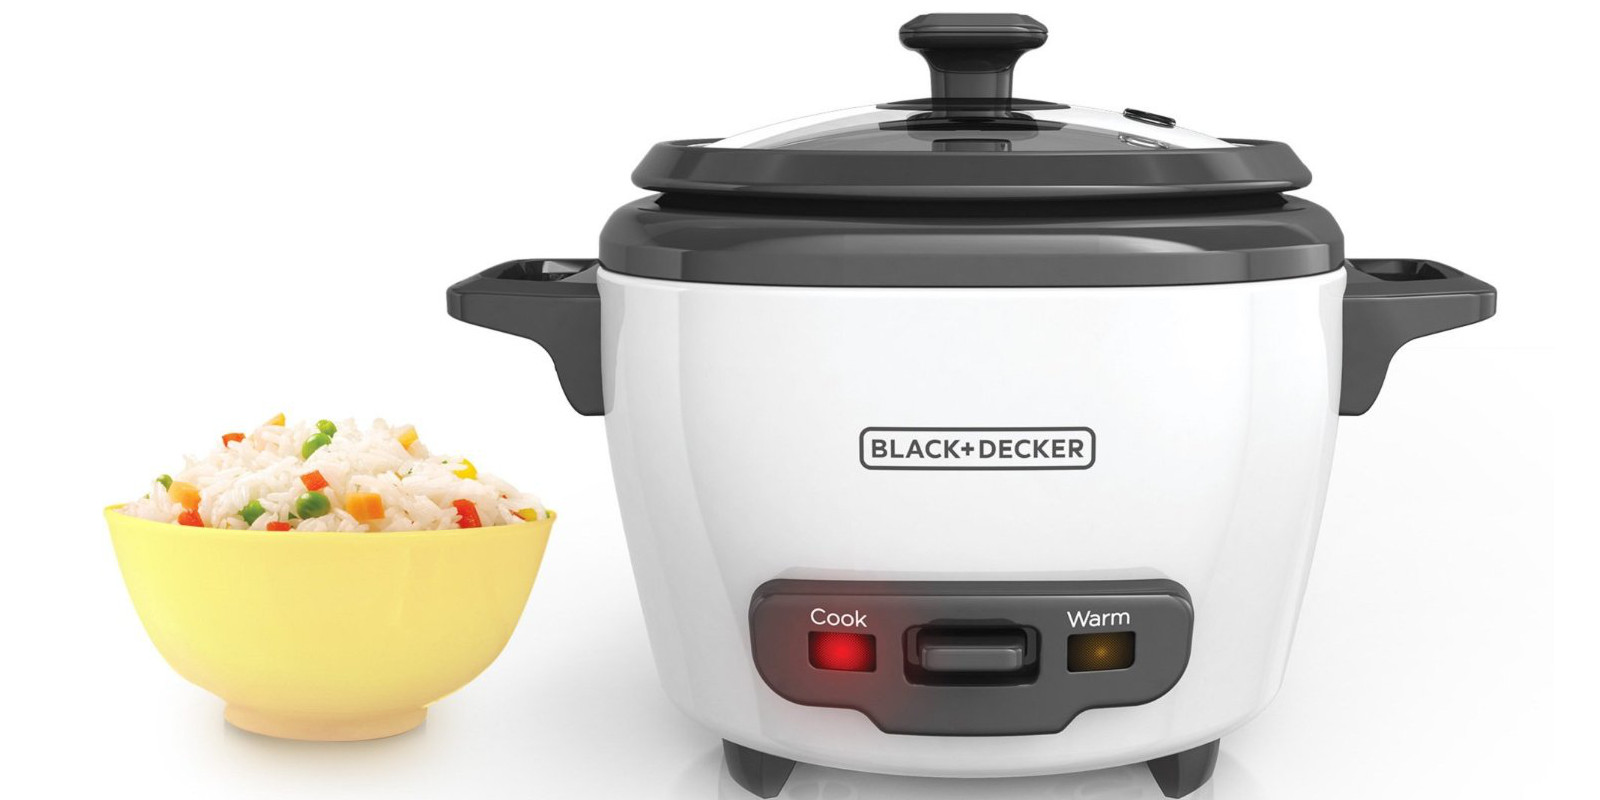 Black+Decker Mini Rice/Food Cooker for under $15 Prime shipped